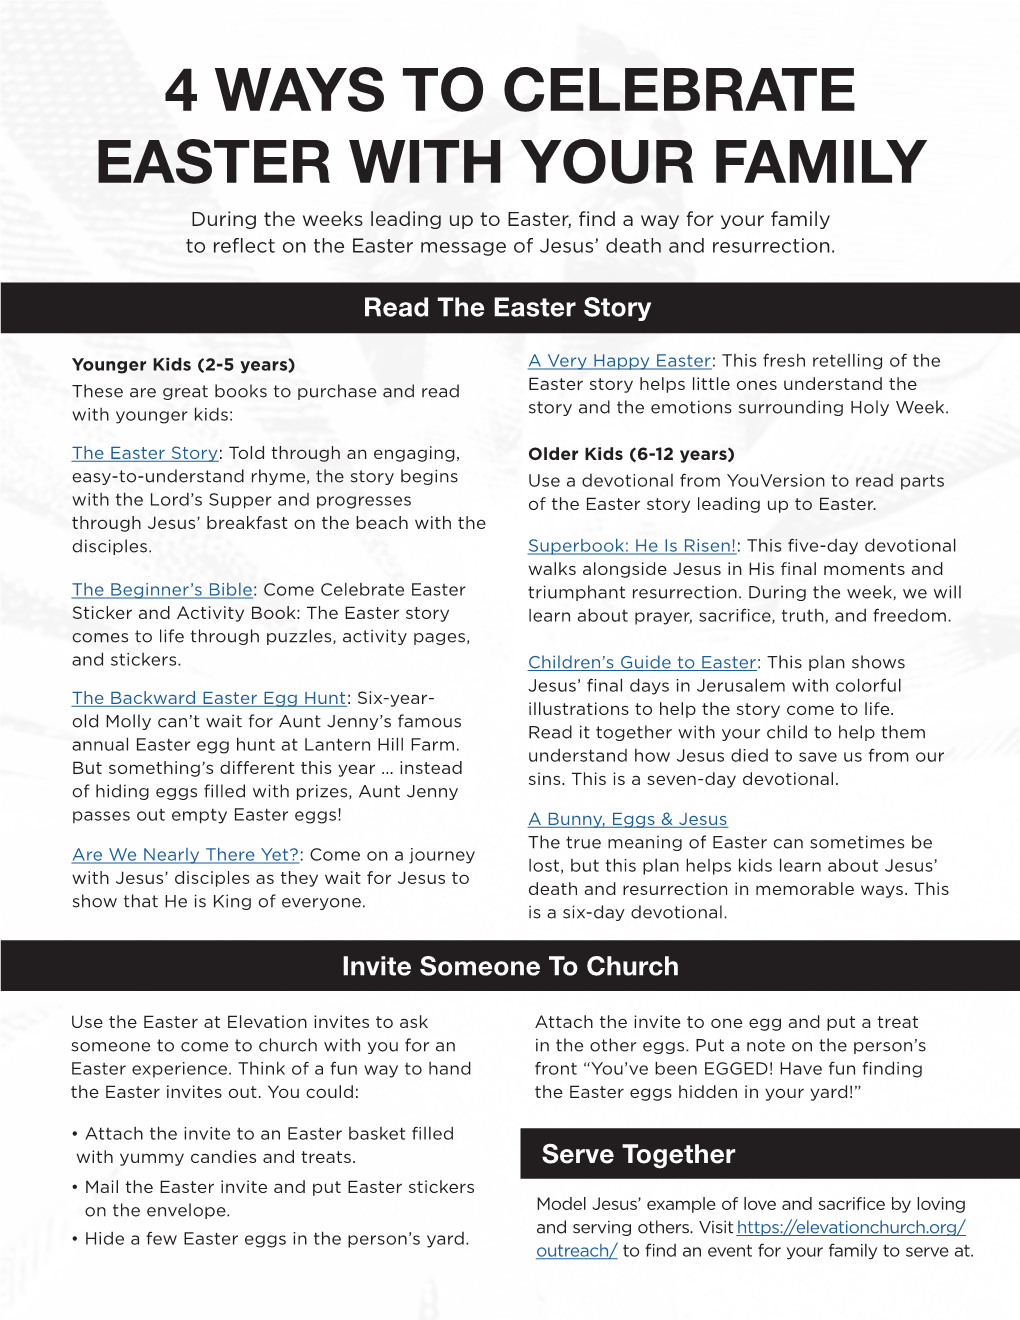 4 Ways to Celebrate Easter with Your Family